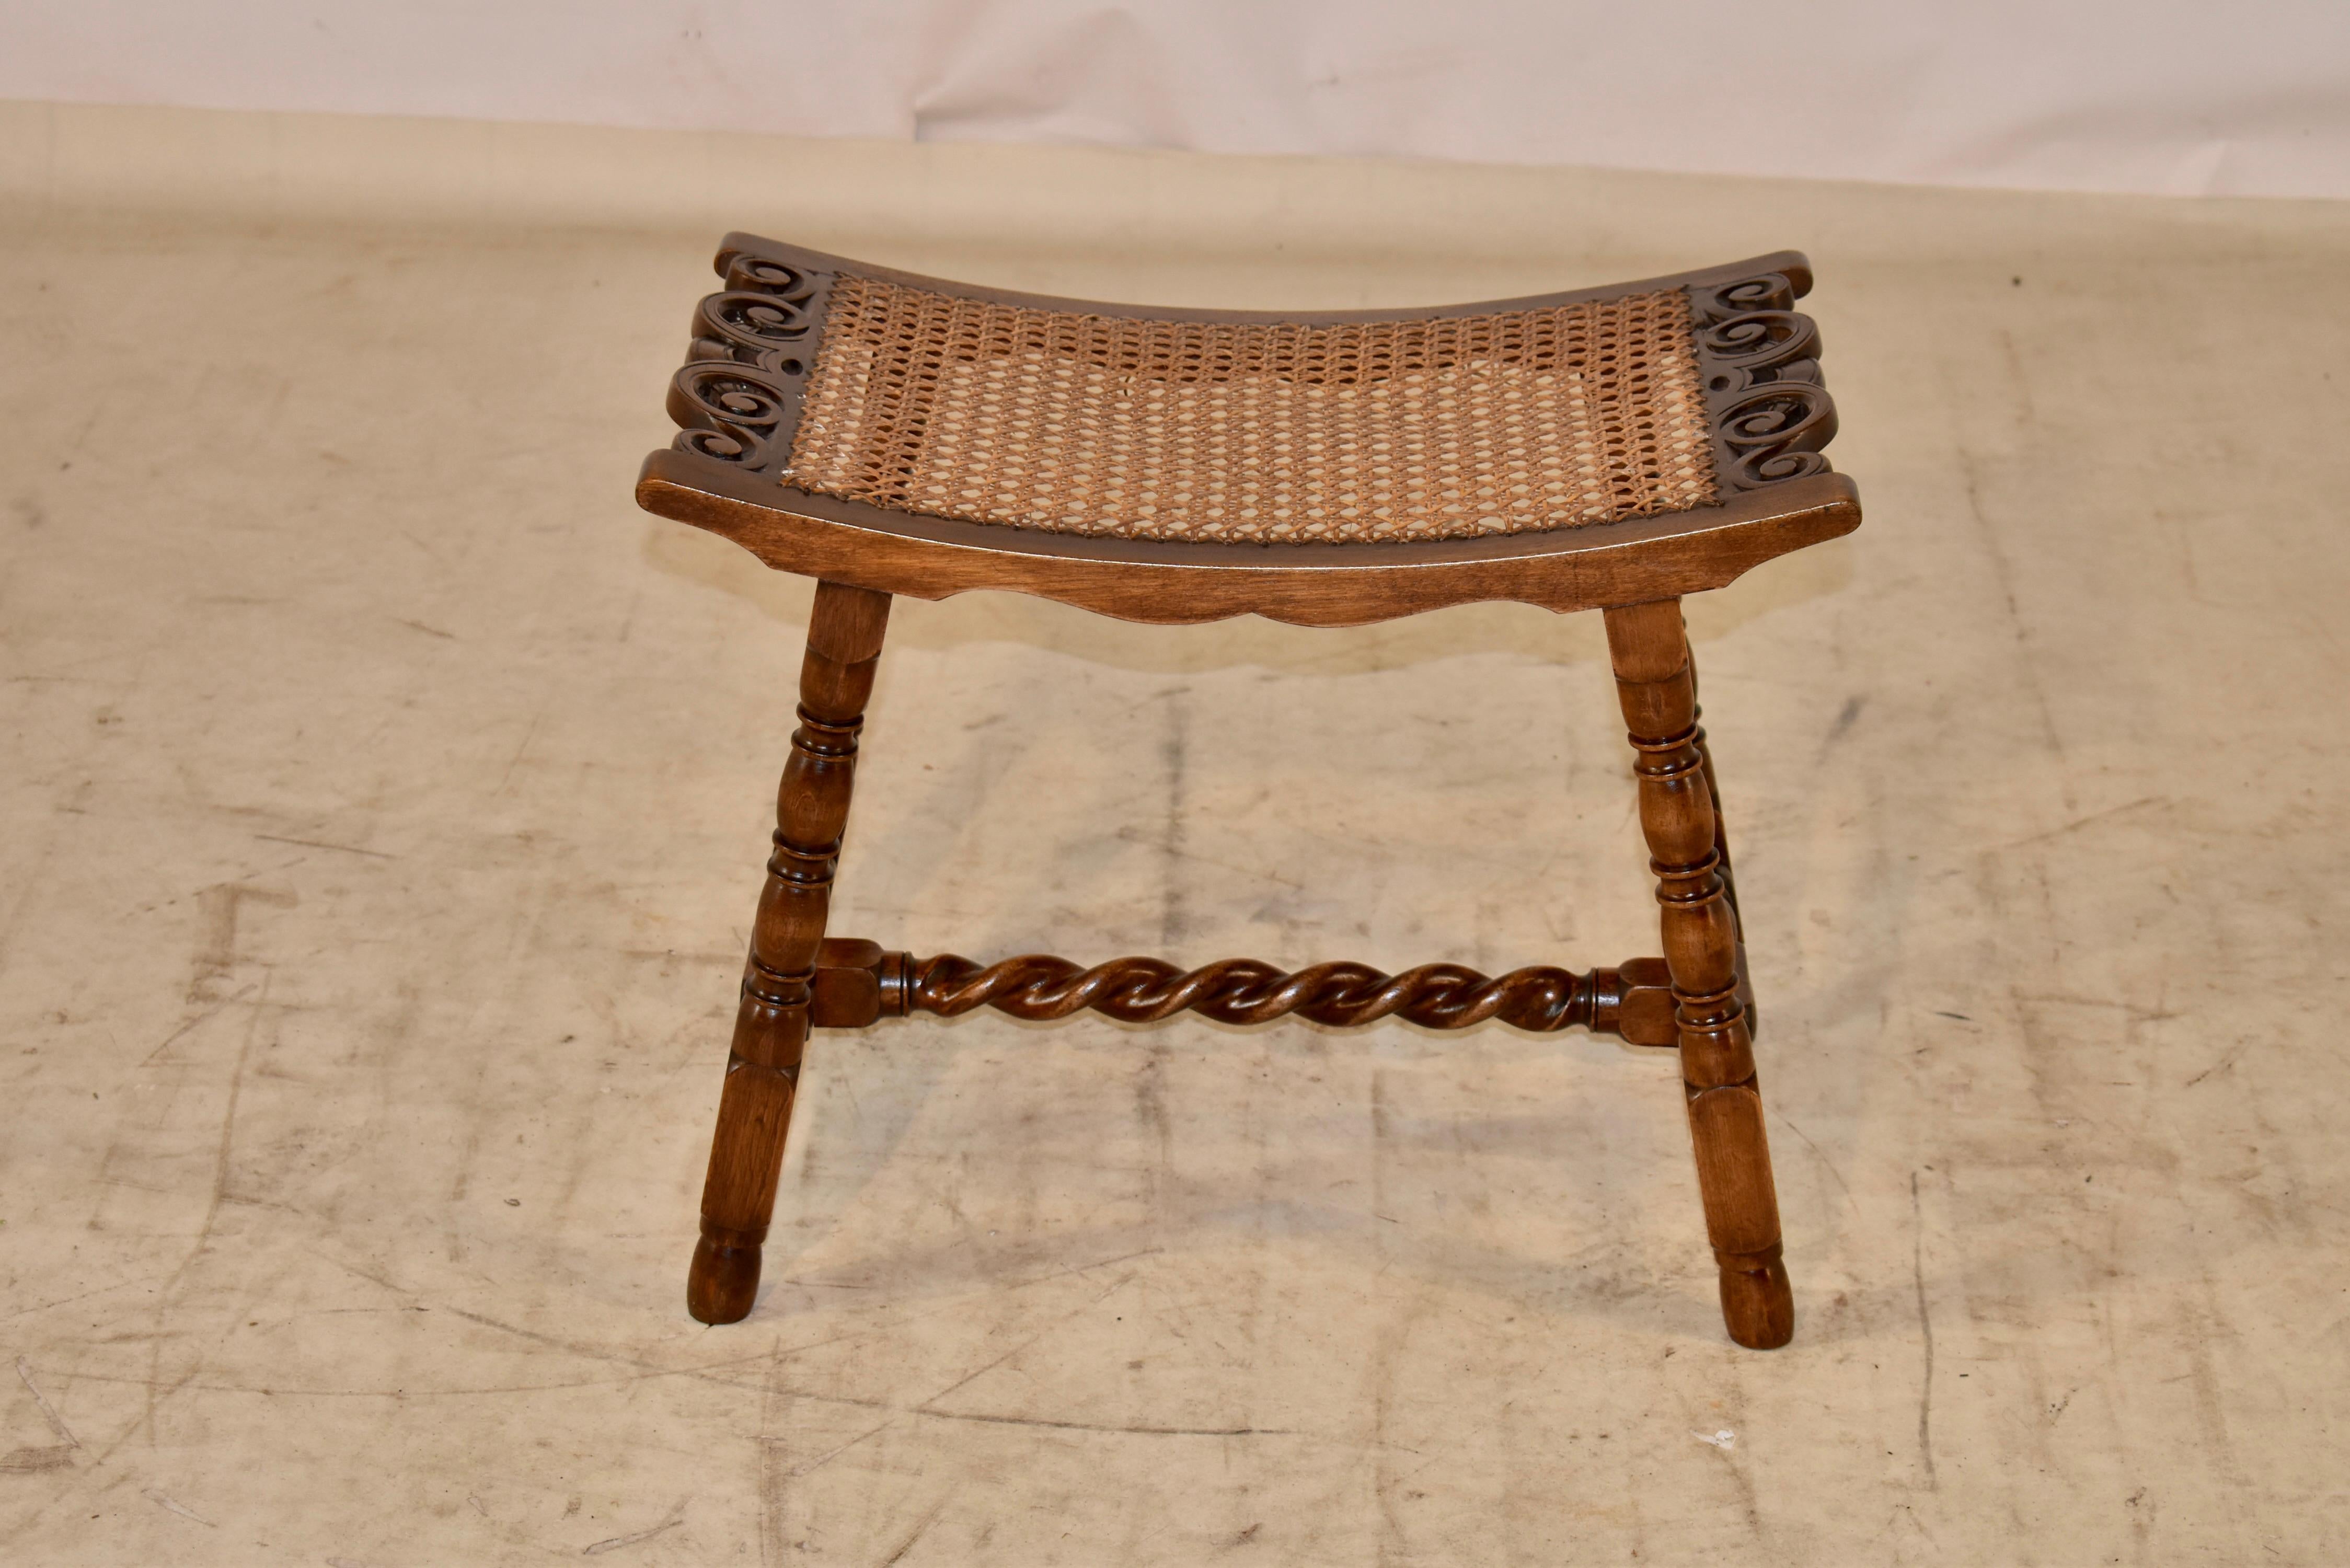 19th century oak stool from England with a played top which has hand carved sides and pierced decoration for added design interest. The seat retains its original caning. The seat is supported on hand turned and splayed legs, joined by turned